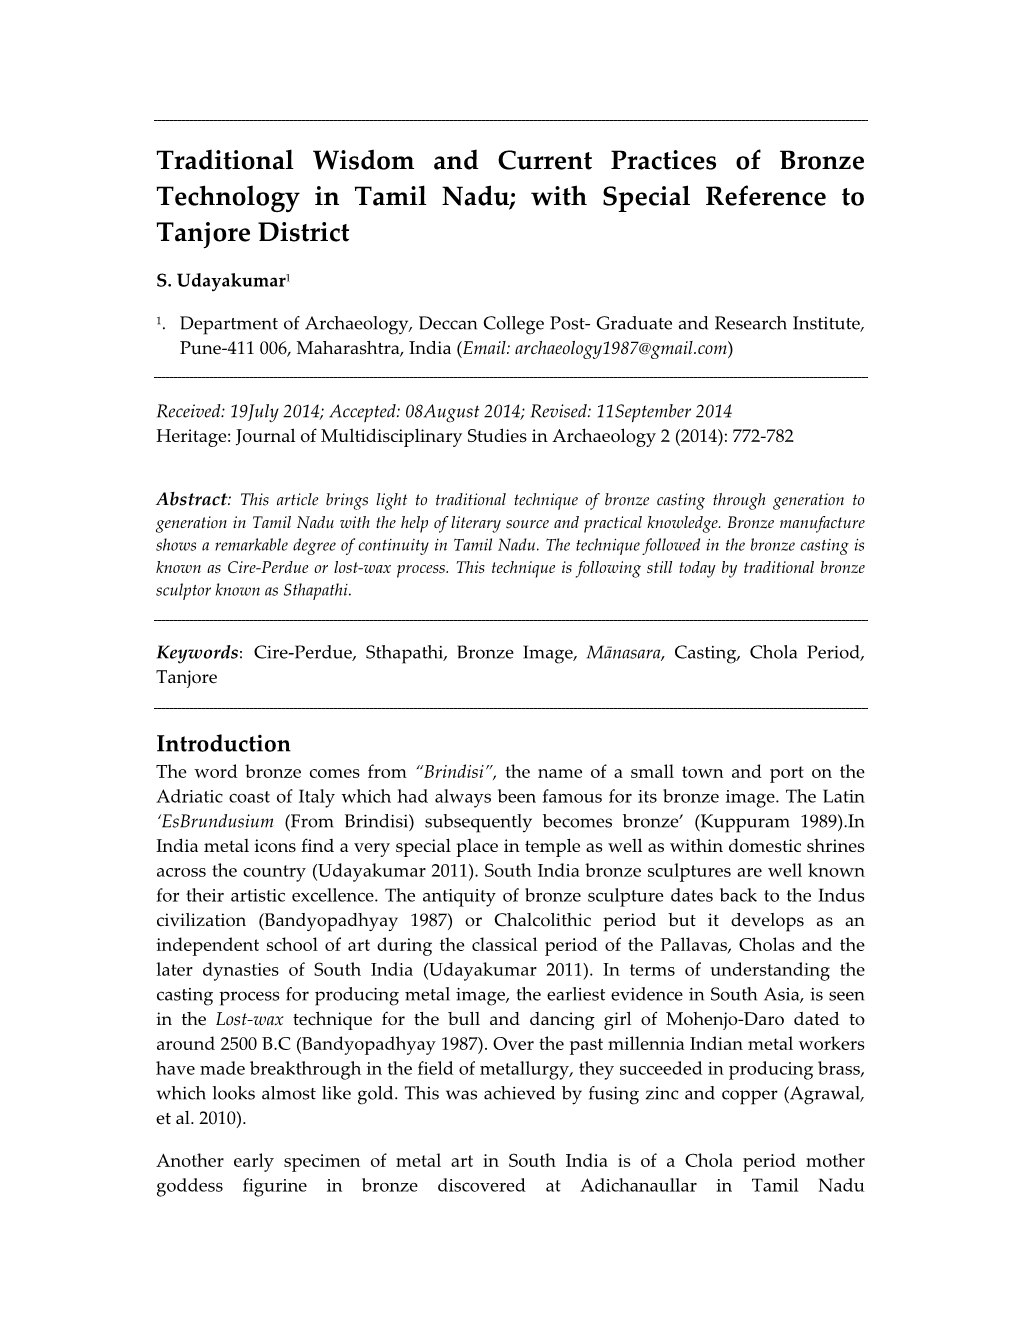 Traditional Wisdom and Current Practices of Bronze Technology in Tamil Nadu; with Special Reference to Tanjore District